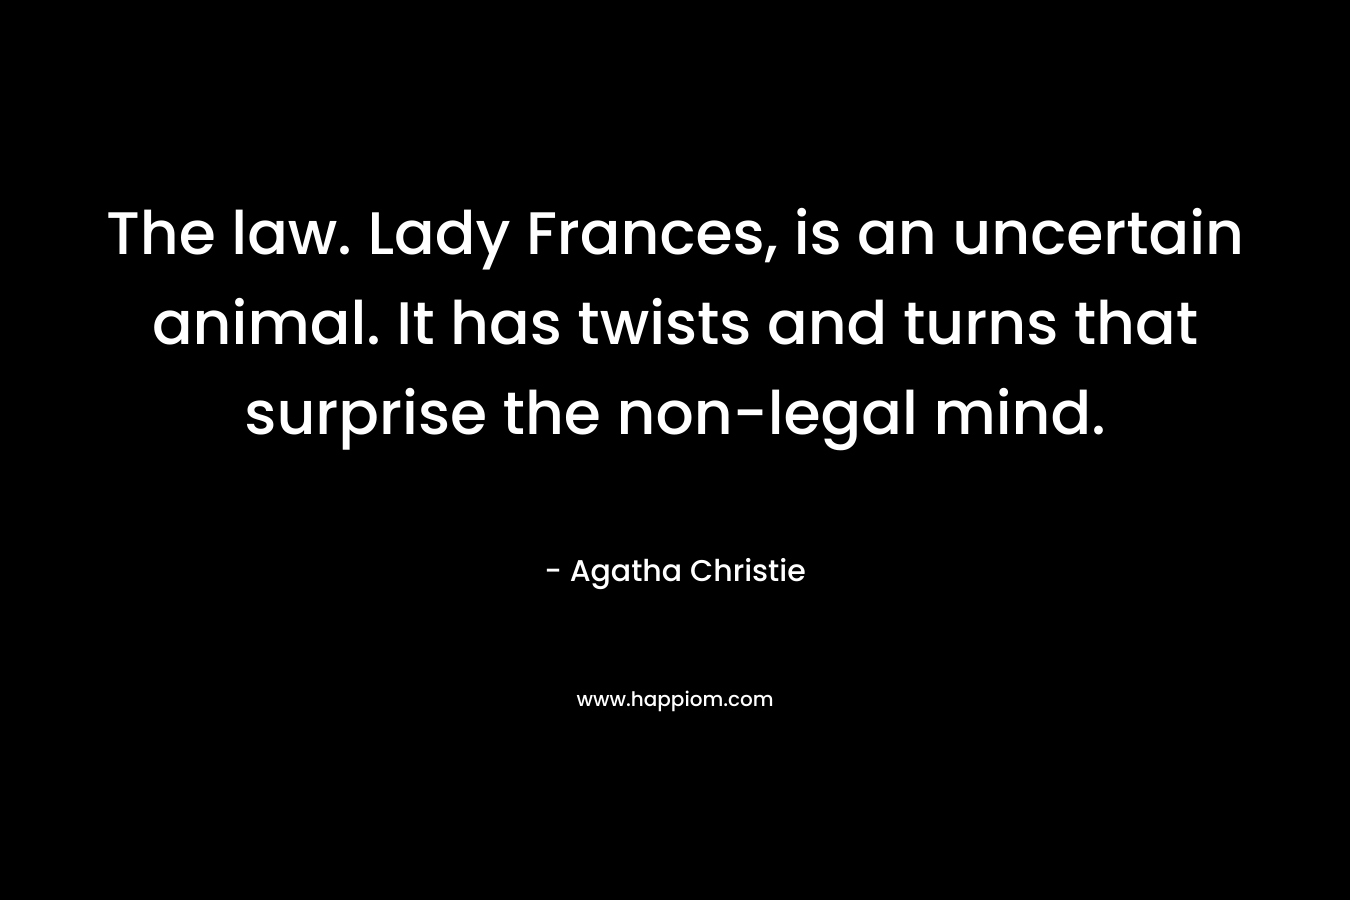 The law. Lady Frances, is an uncertain animal. It has twists and turns that surprise the non-legal mind. – Agatha Christie